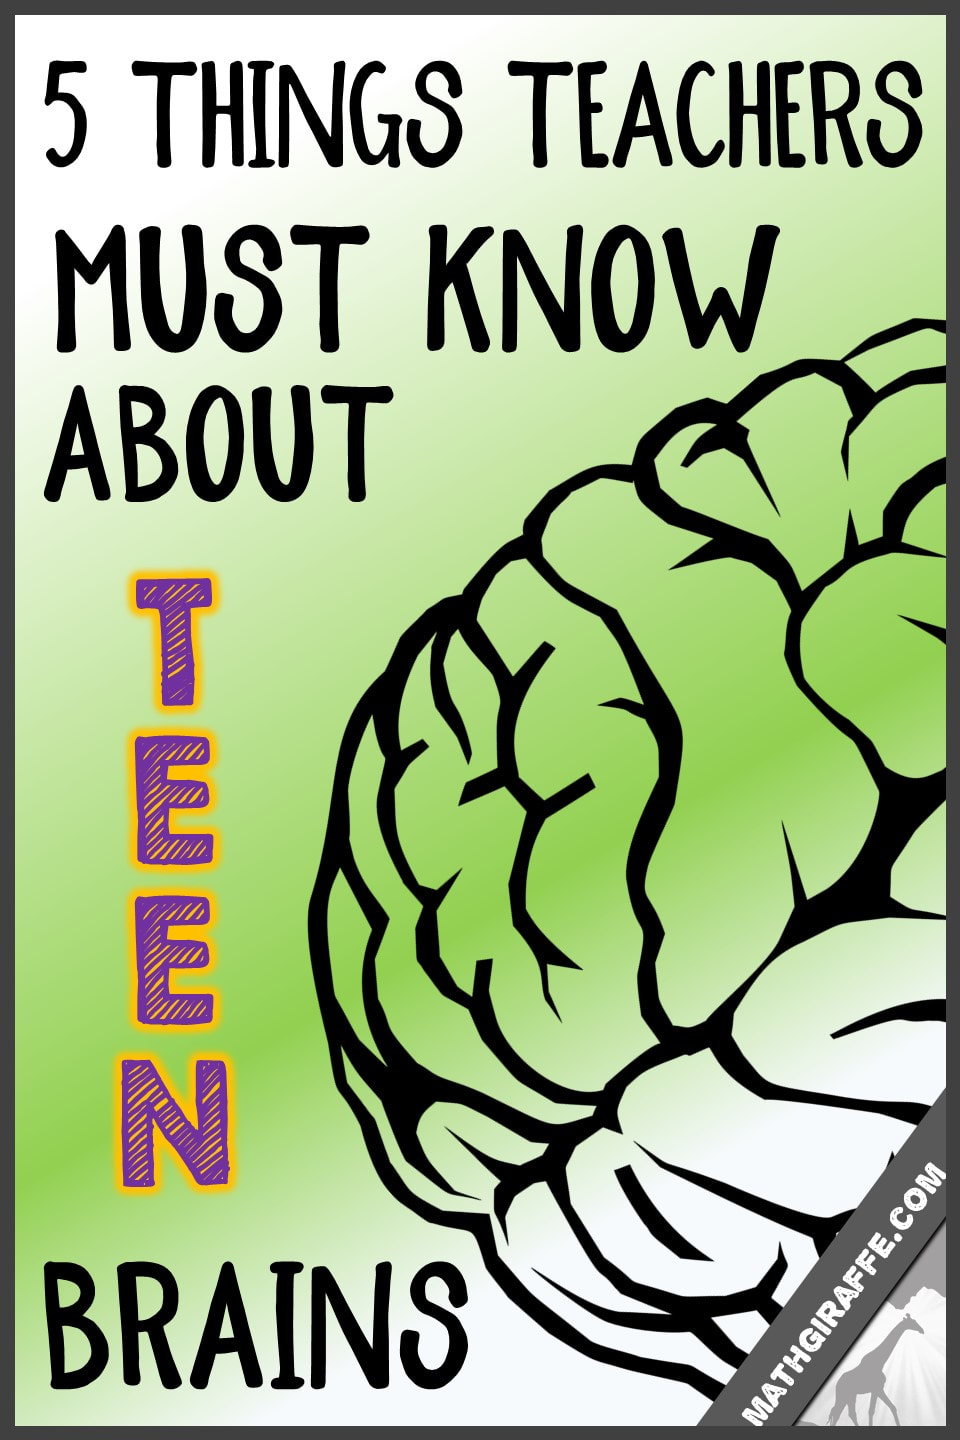 about teen brains - what we need to know as middle and high school teachers